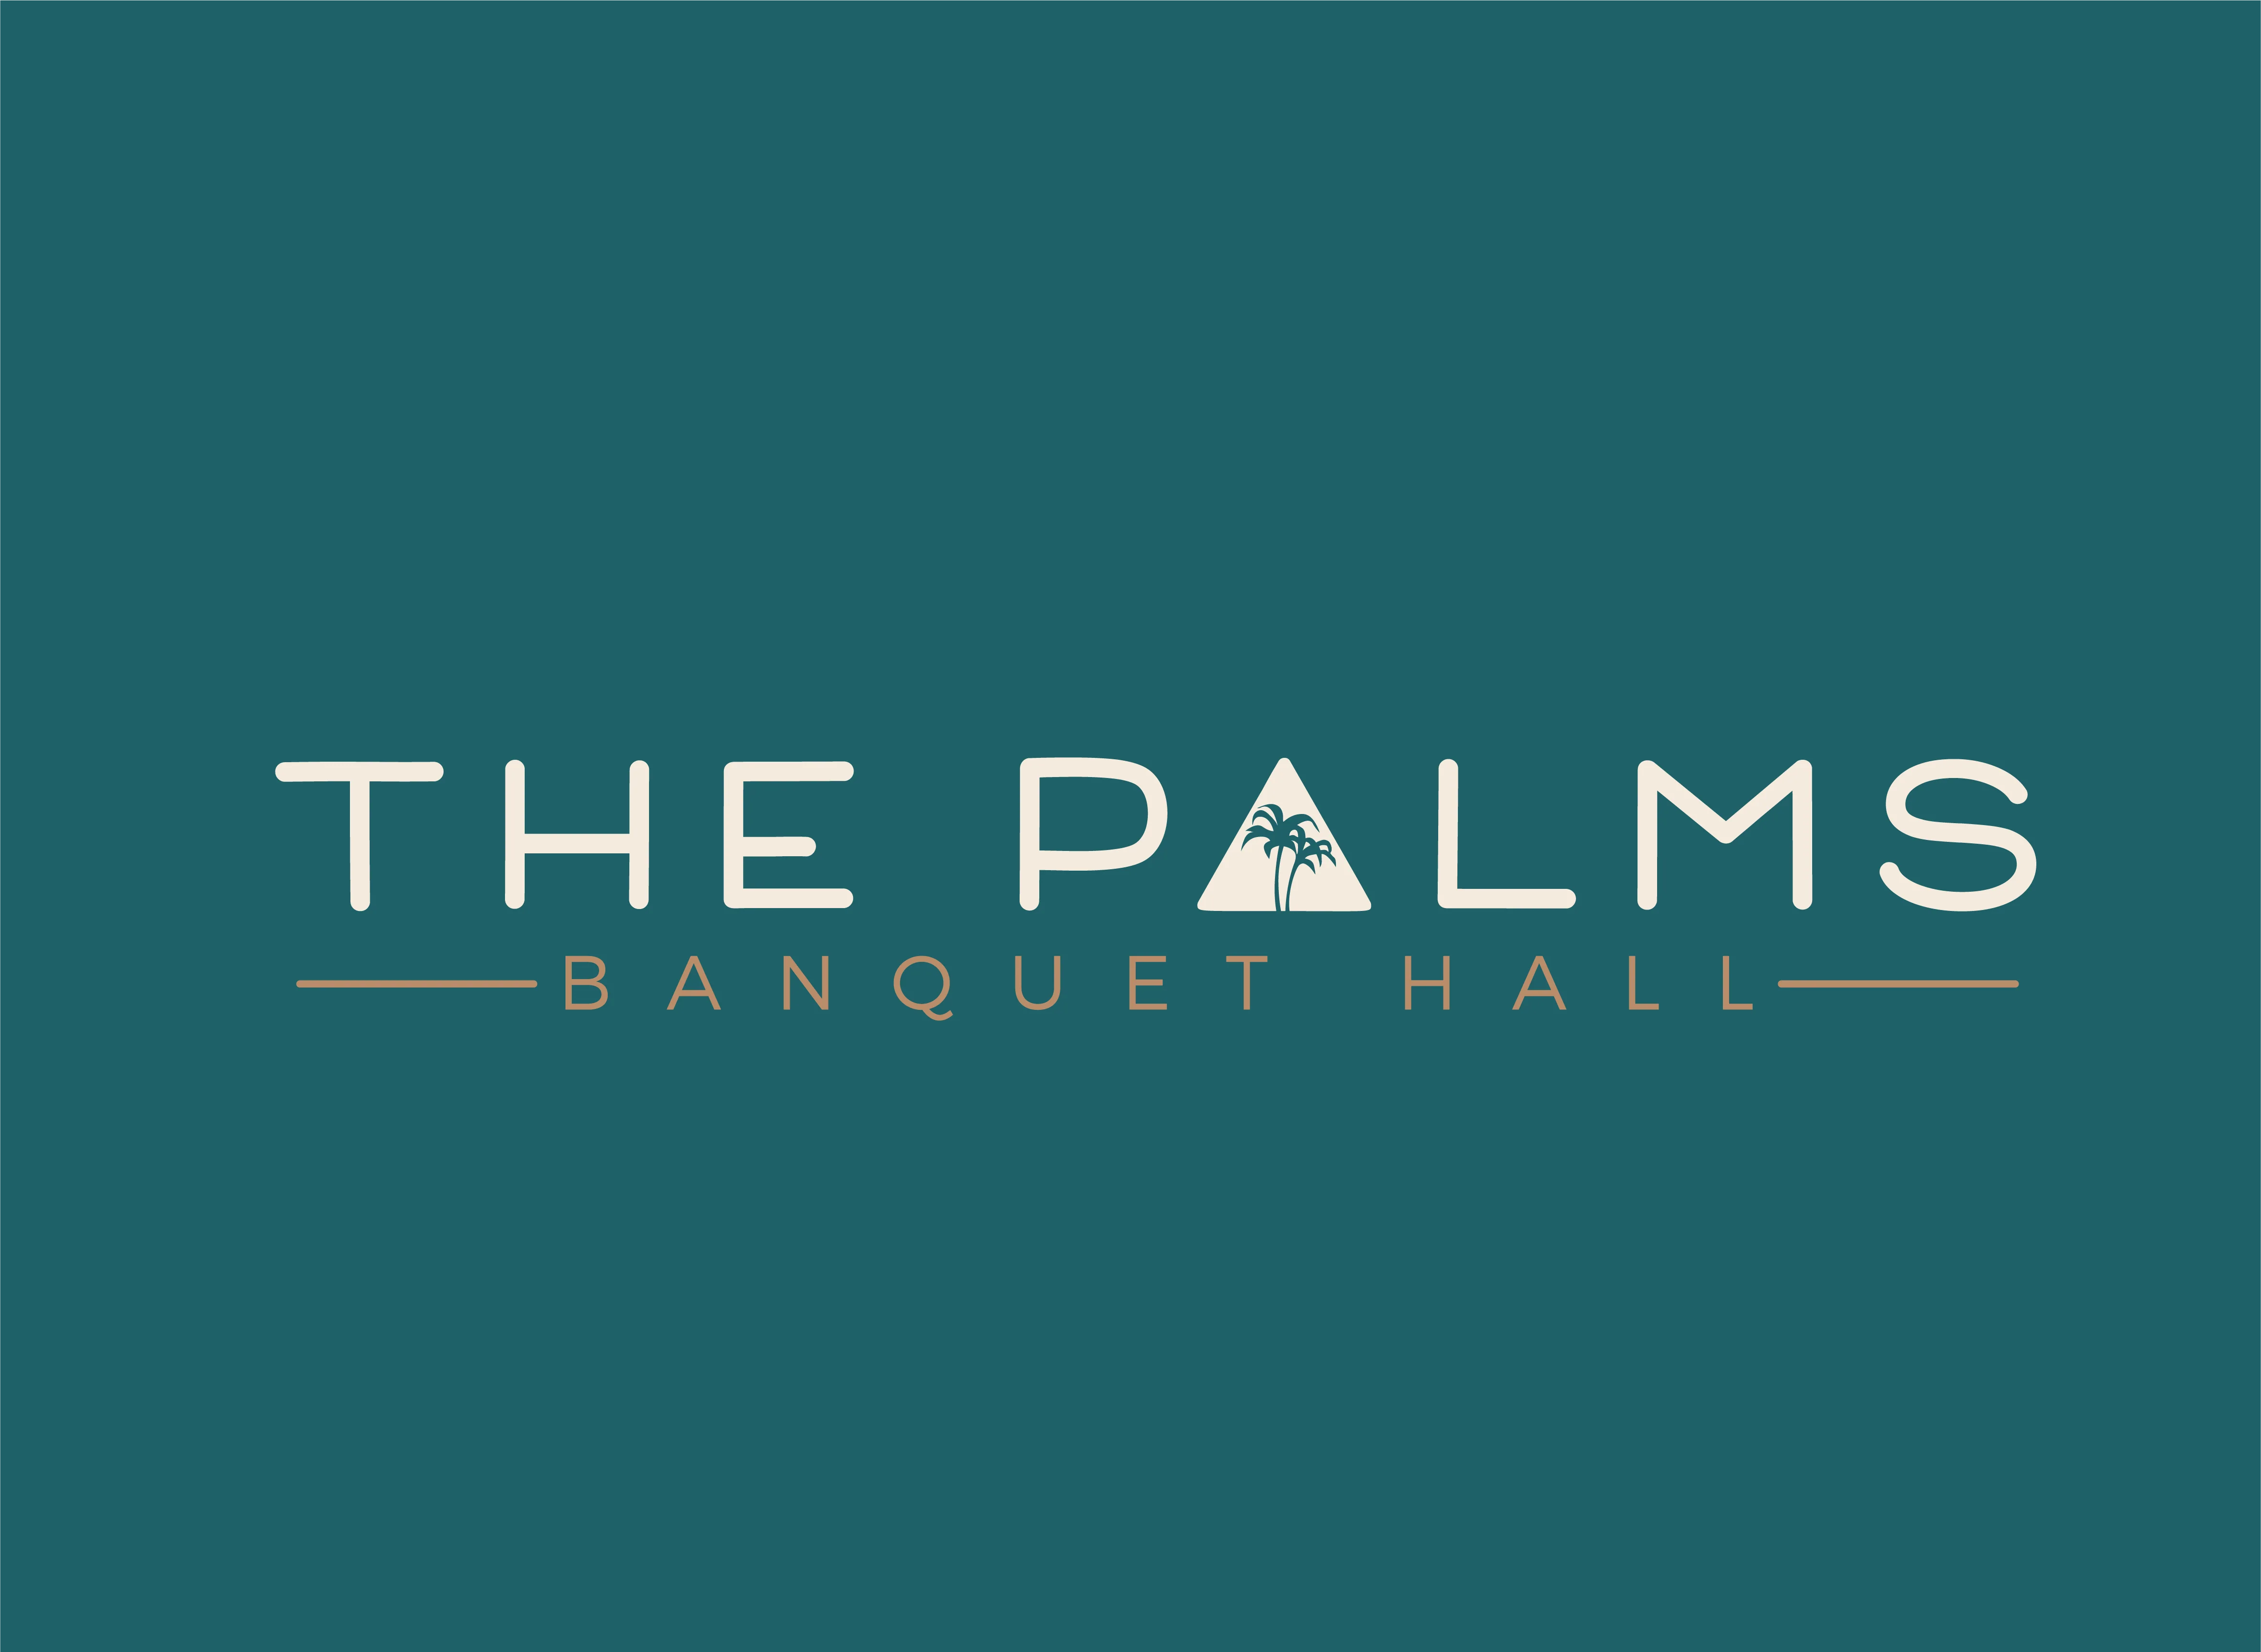 The Palms banquet hall